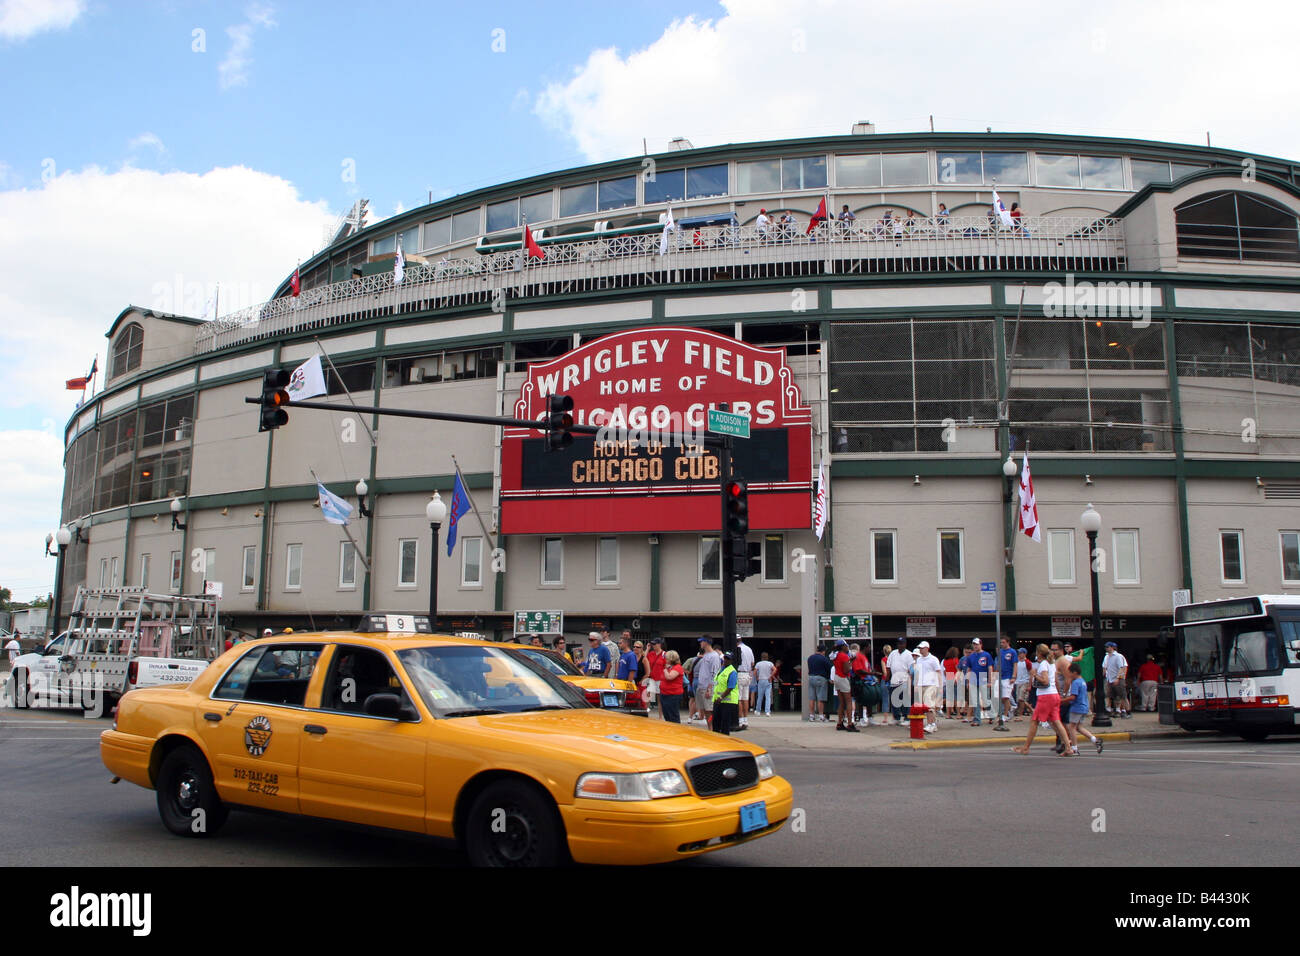 Wrigley Field Chicago Cubs Addison Street Chicago Stock Photo - Alamy